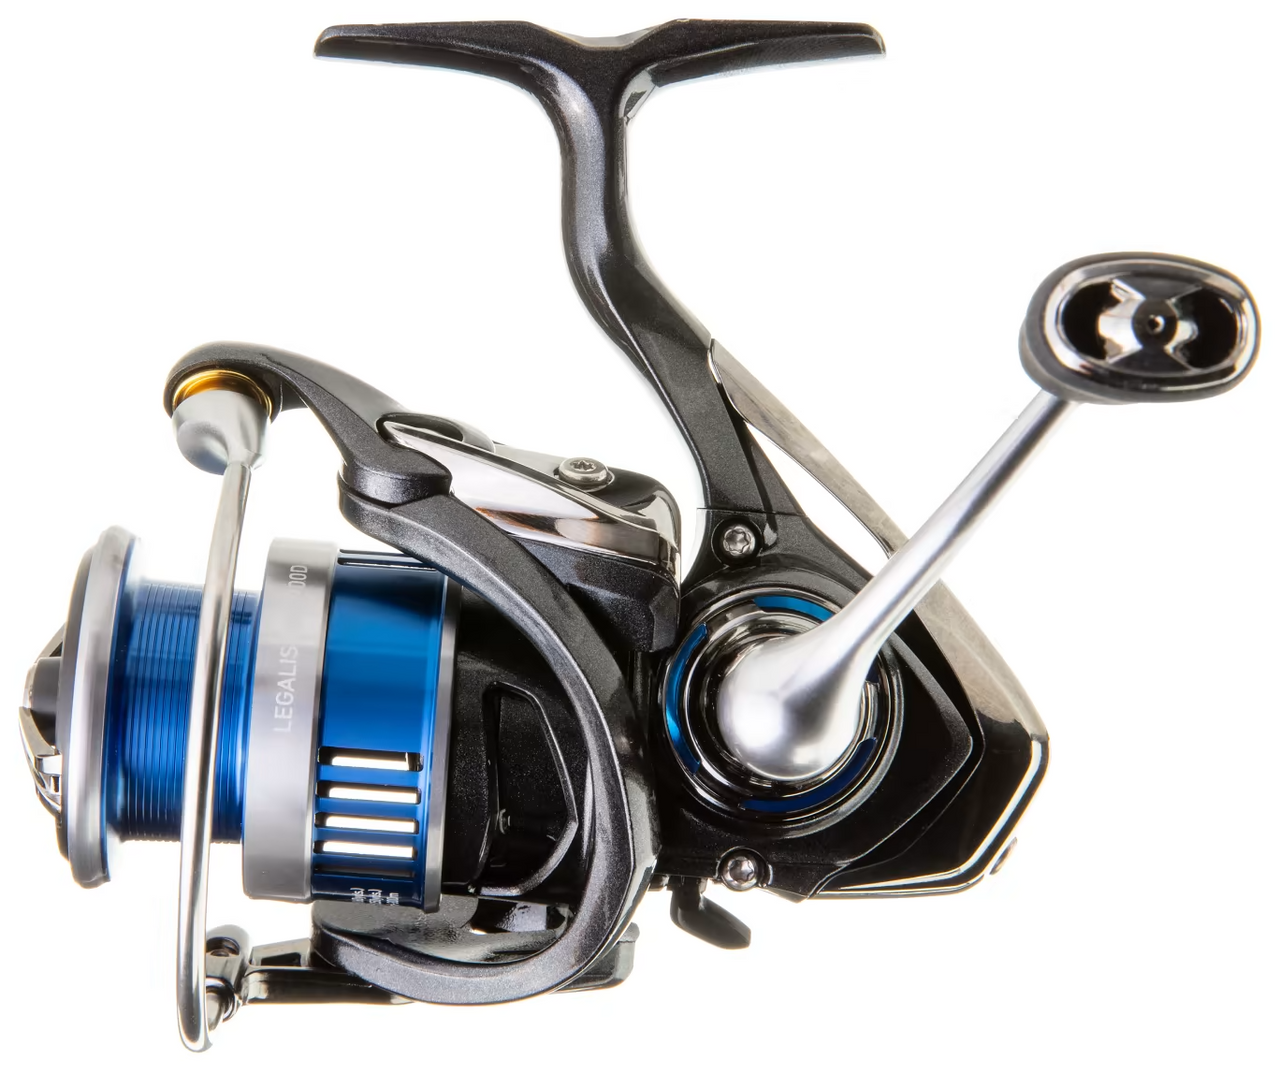 https://cdn11.bigcommerce.com/s-s7ib93jl4n/images/stencil/1280x1280/products/27894/84283/daiwa-legalis-lt-spinning-reel-2__64109.1679496154.png?c=2?imbypass=on